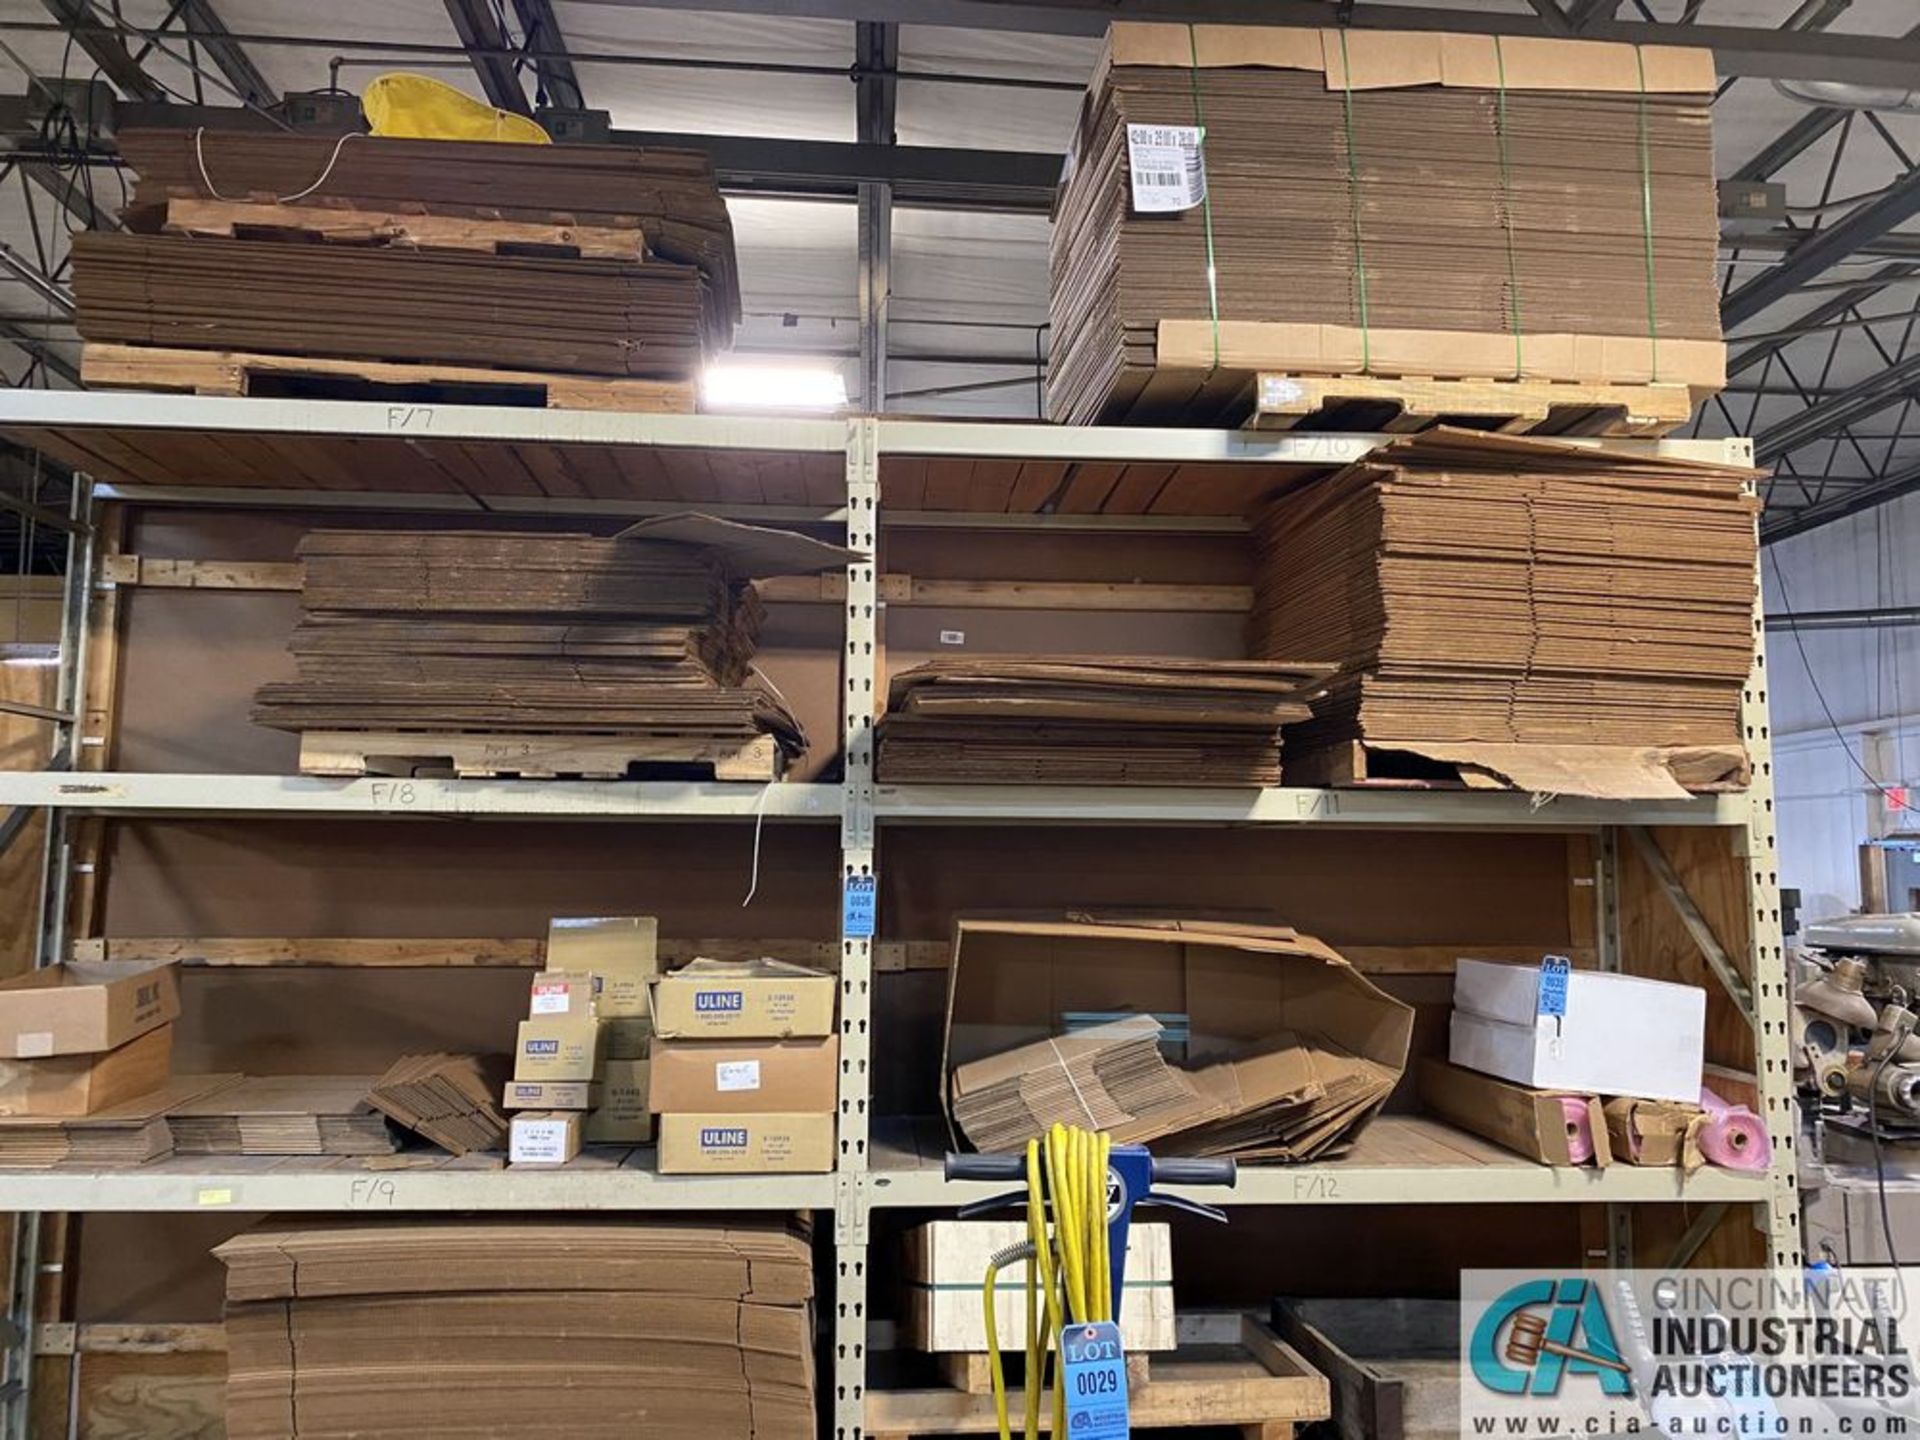 (LOT) CONTENTS OF 4-SECTIONS PALLET RACK - ASSORTED CORRUGATED BOXES AND OTHER SHIPPING SUPPLIES